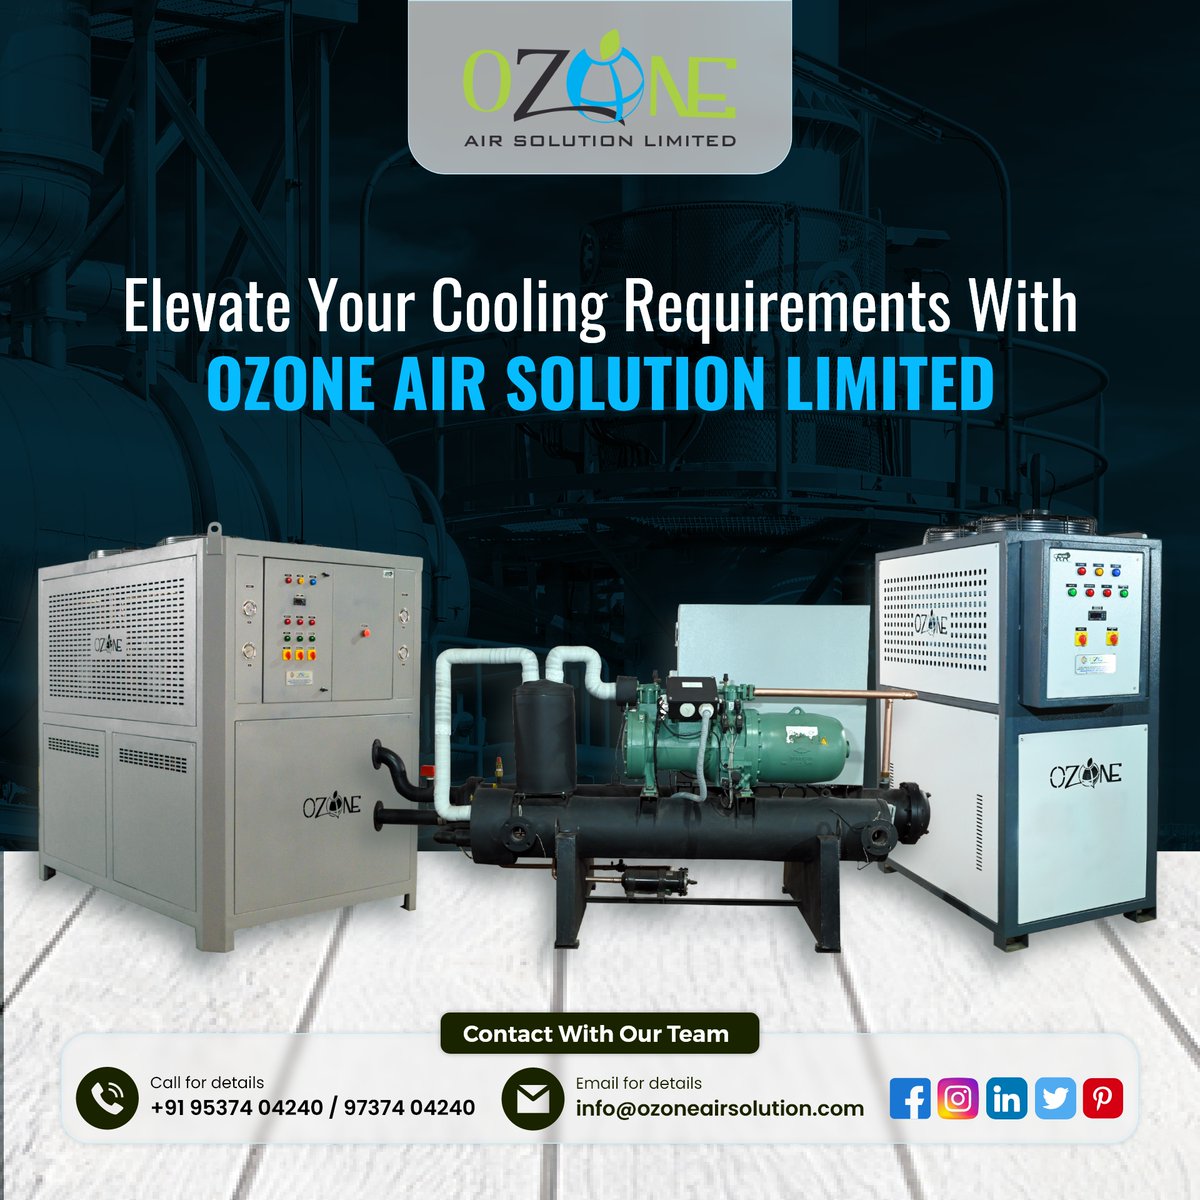 Cool down this summer with the state-of-the-art cooling systems from OZONE AIR SOLUTION LIMITED. Advanced technology to meet all your industrial cooling needs. Connect with us today and elevate your space to the next level of comfort! 🌬️✨

#CoolingSolutions #IndustrialCooling